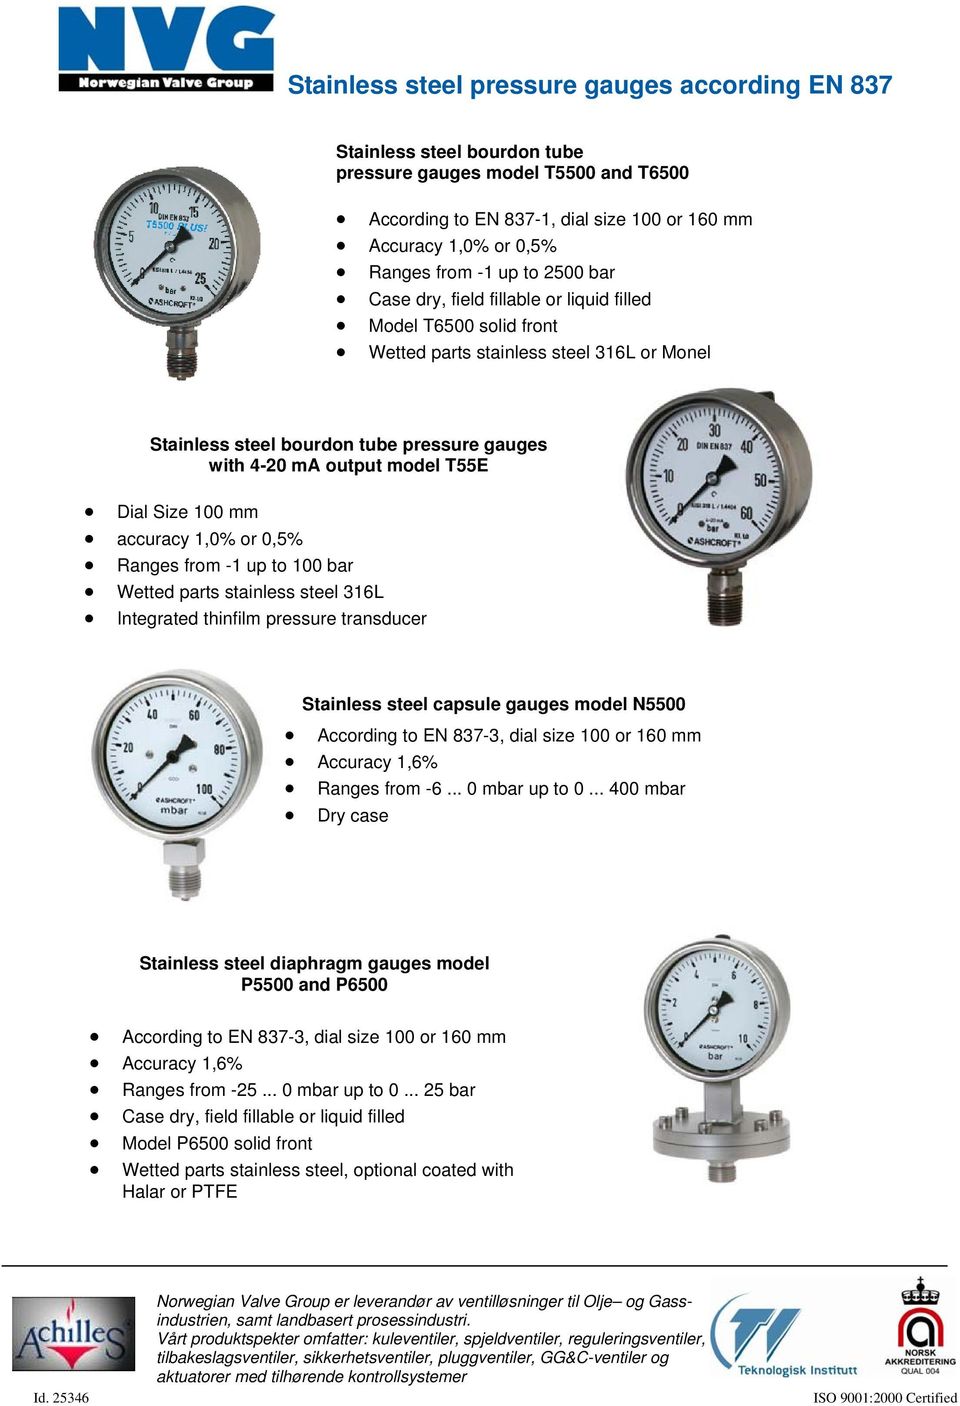 Dial Size 100 mm accuracy 1,0% or 0,5% Ranges from -1 up to 100 bar Wetted parts stainless steel 316L Integrated thinfilm pressure transducer Stainless steel capsule gauges model N5500 According to